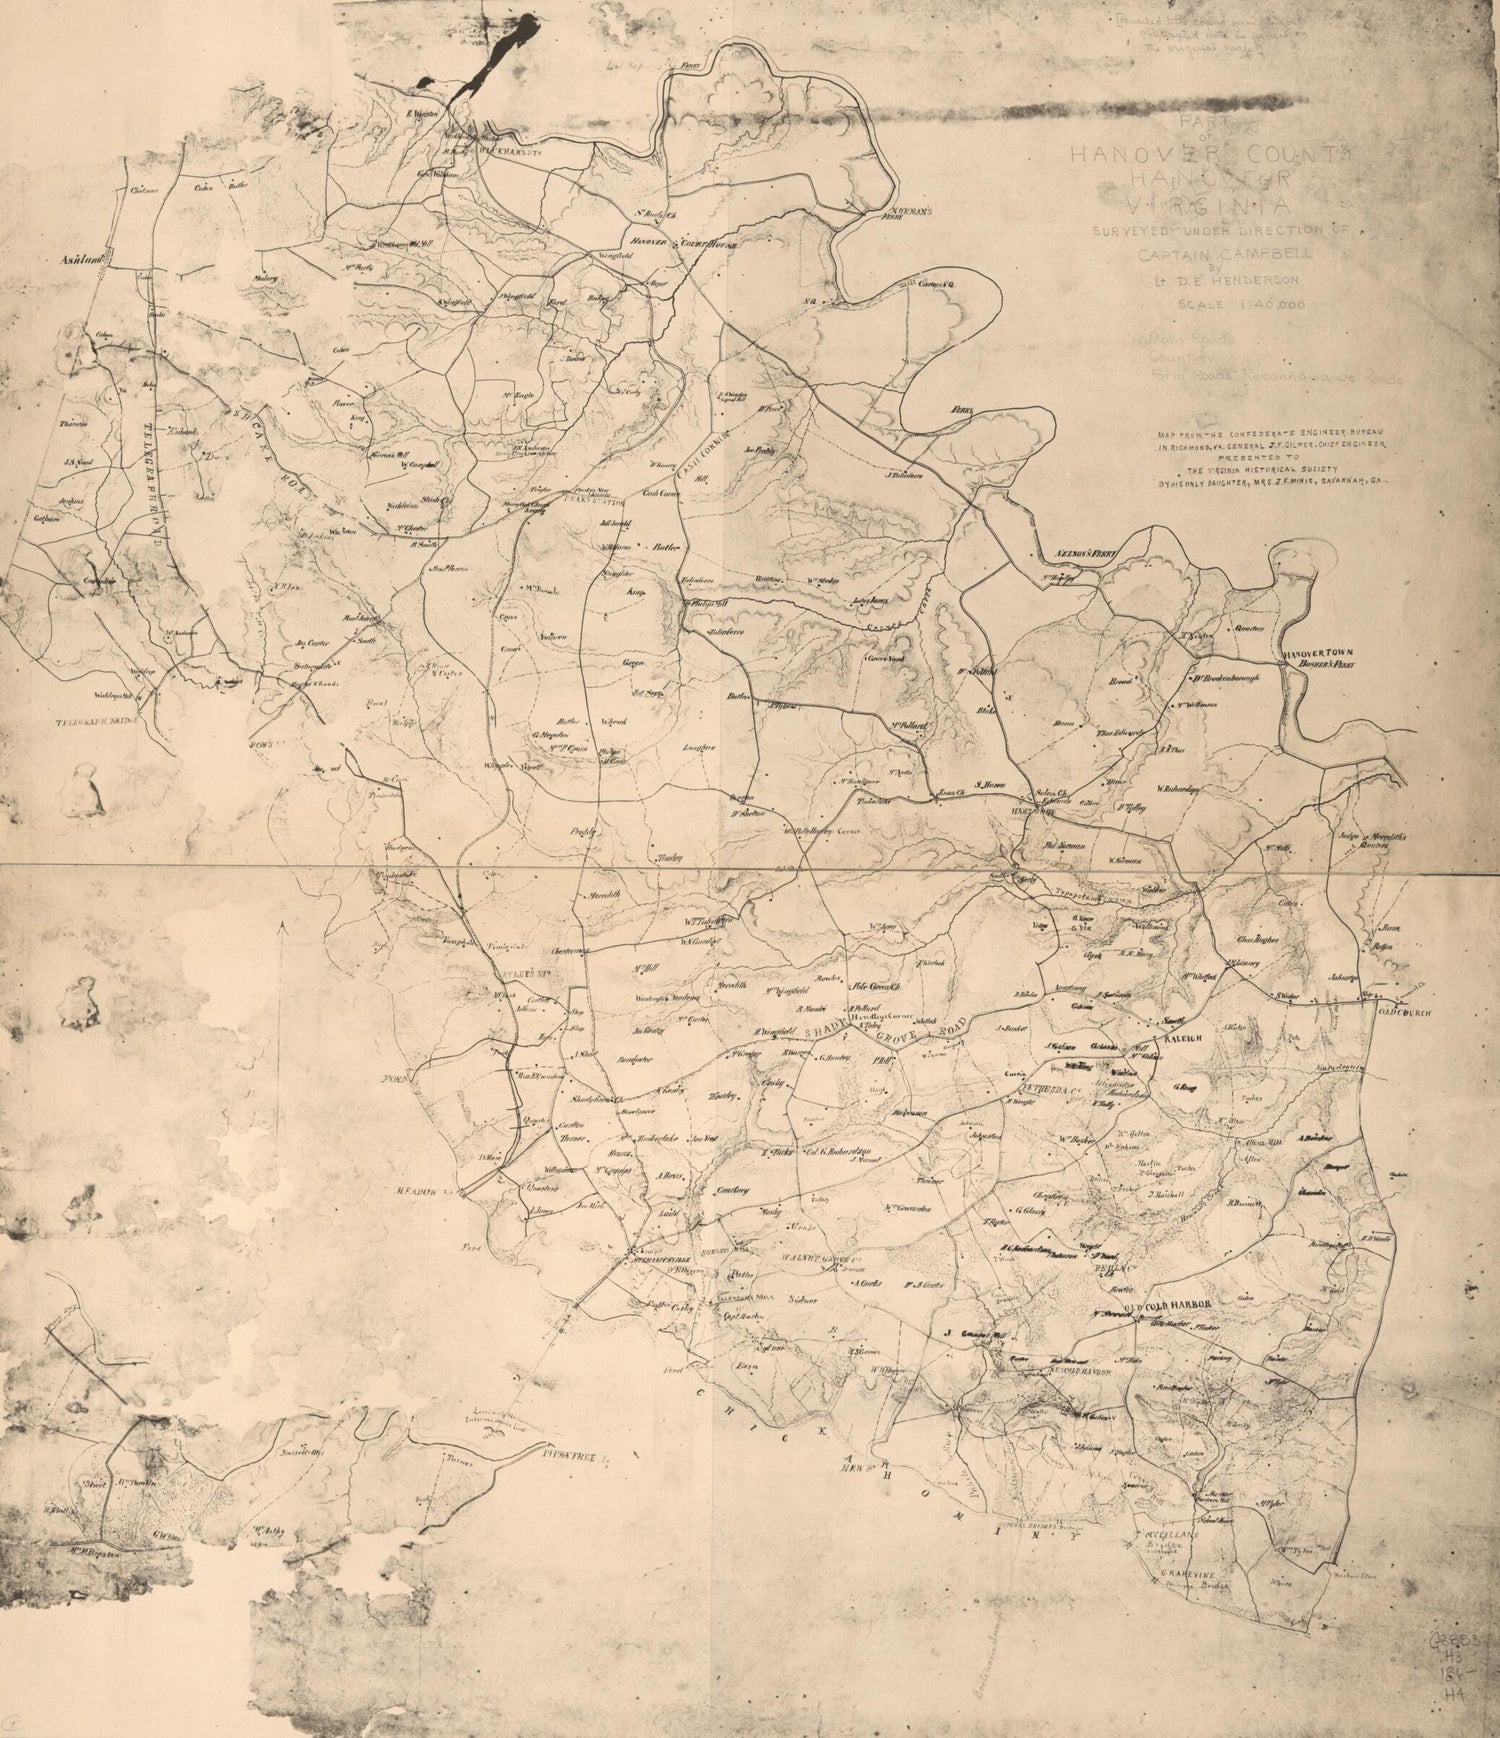 This old map of Part of Hanover County, Hanove?r, Virginia : Southern Portion (Part of Hanover County, Virginia) from 1860 was created by Albert H. (Albert Henry) Campbell,  Confederate States of America. Army. Department of Northern Virginia, Jeremy Fra